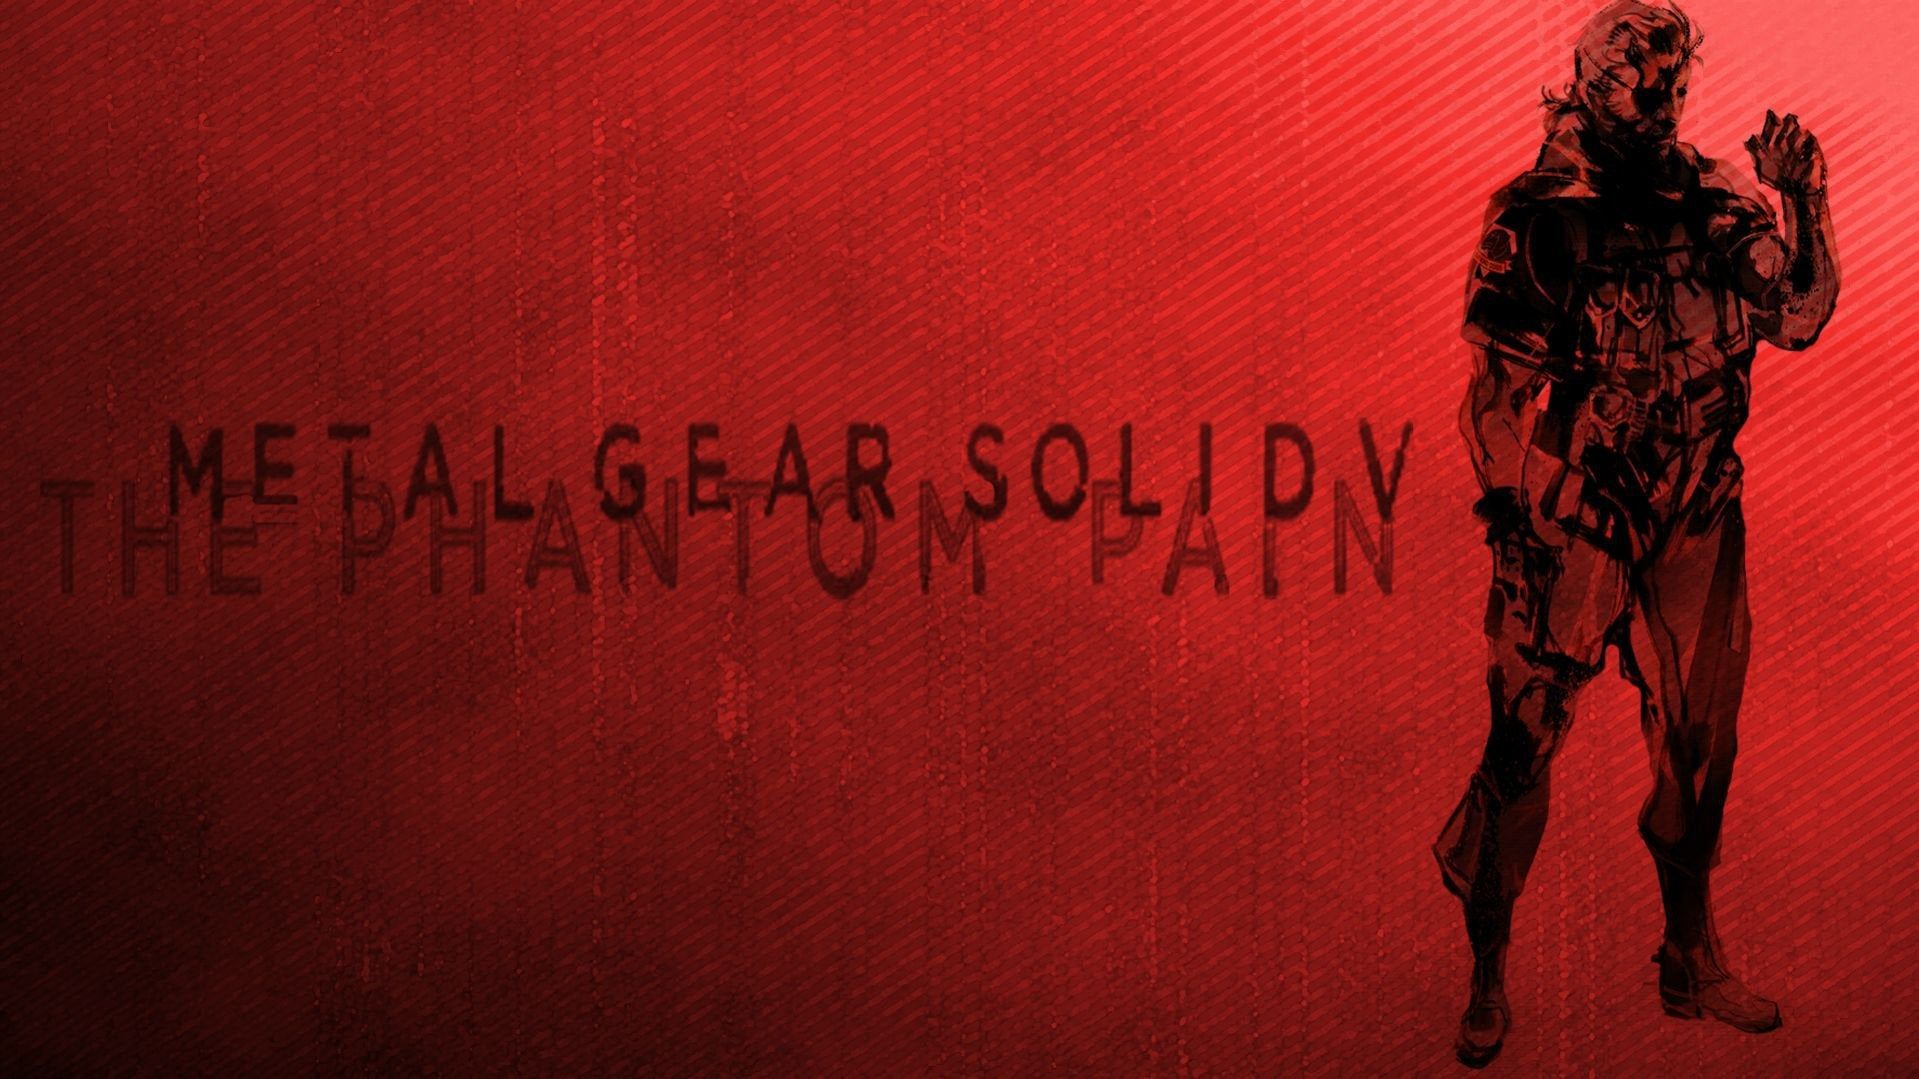 Here's a wallpaper I made for MGSV: The Phantom Pain